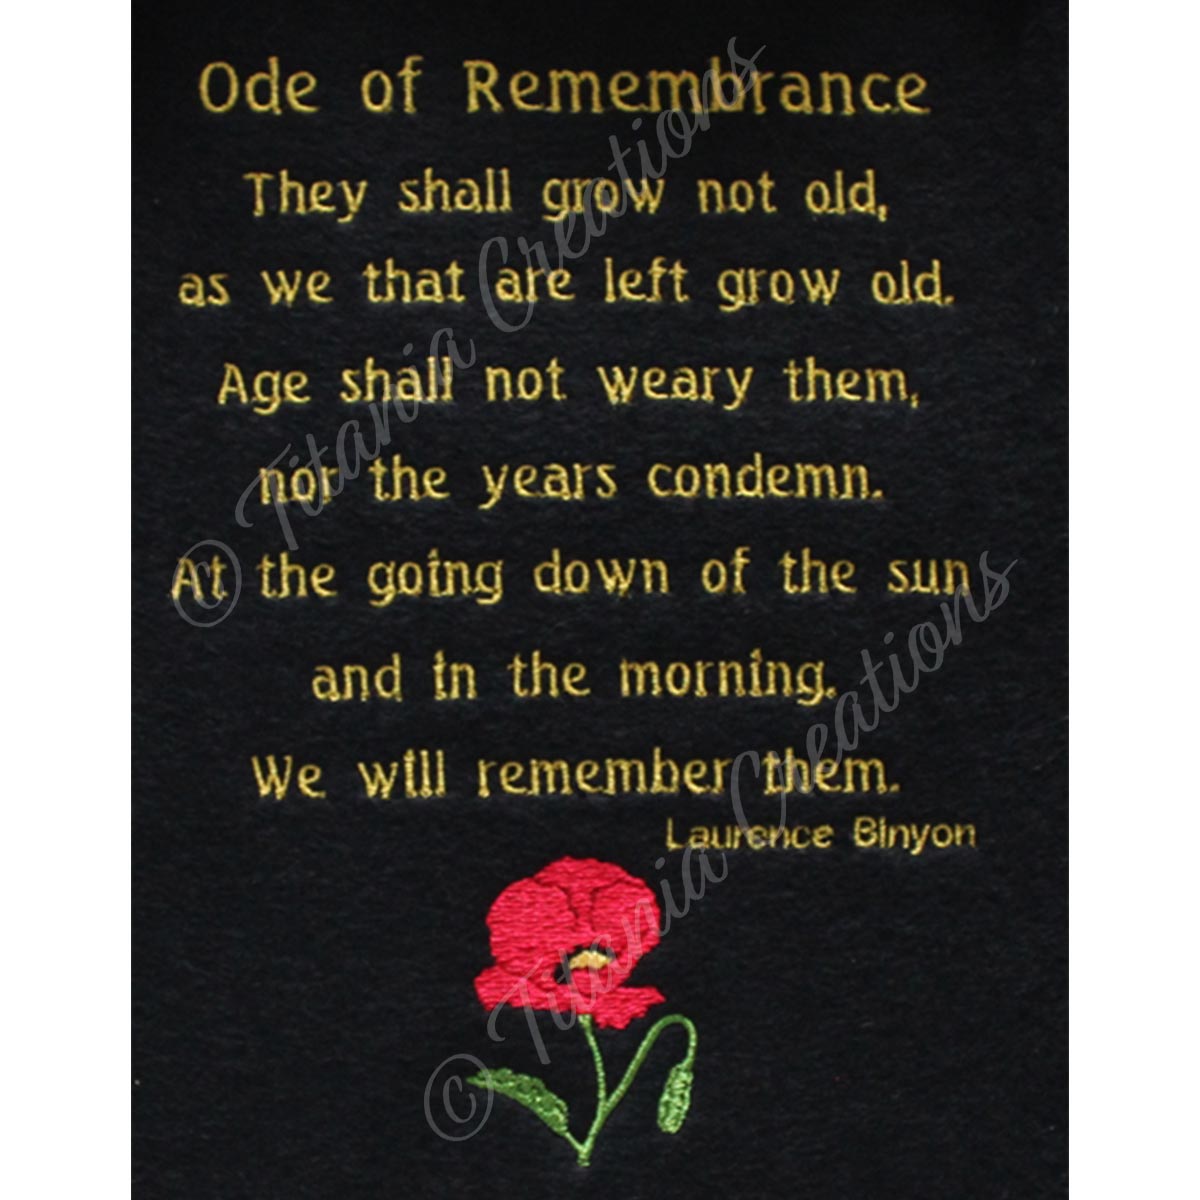 Ode of Remembrance 5x7